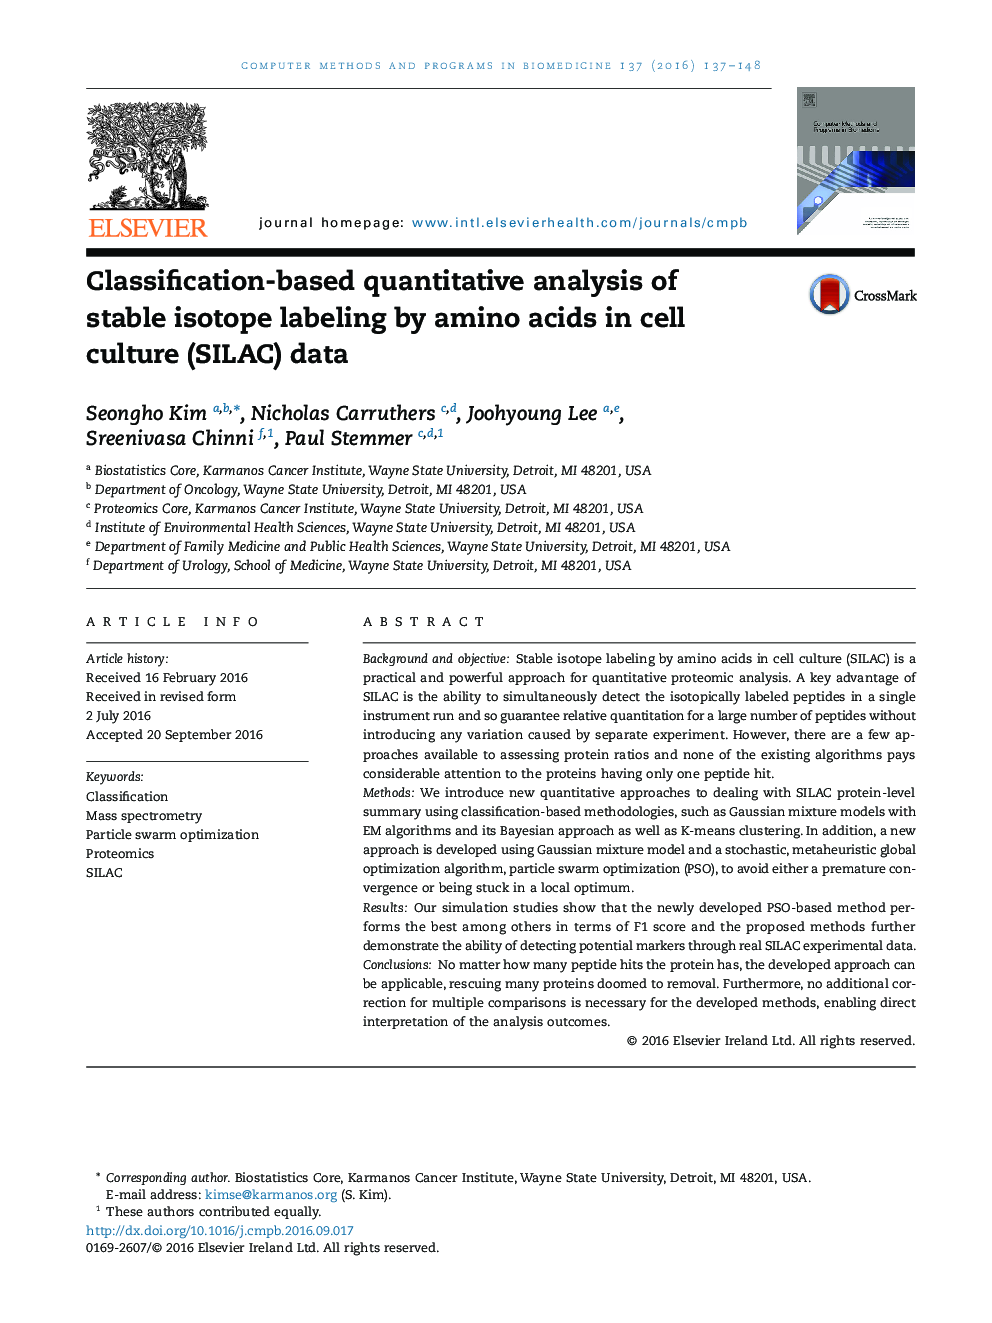 Classification-based quantitative analysis of stable isotope labeling by amino acids in cell culture (SILAC) data